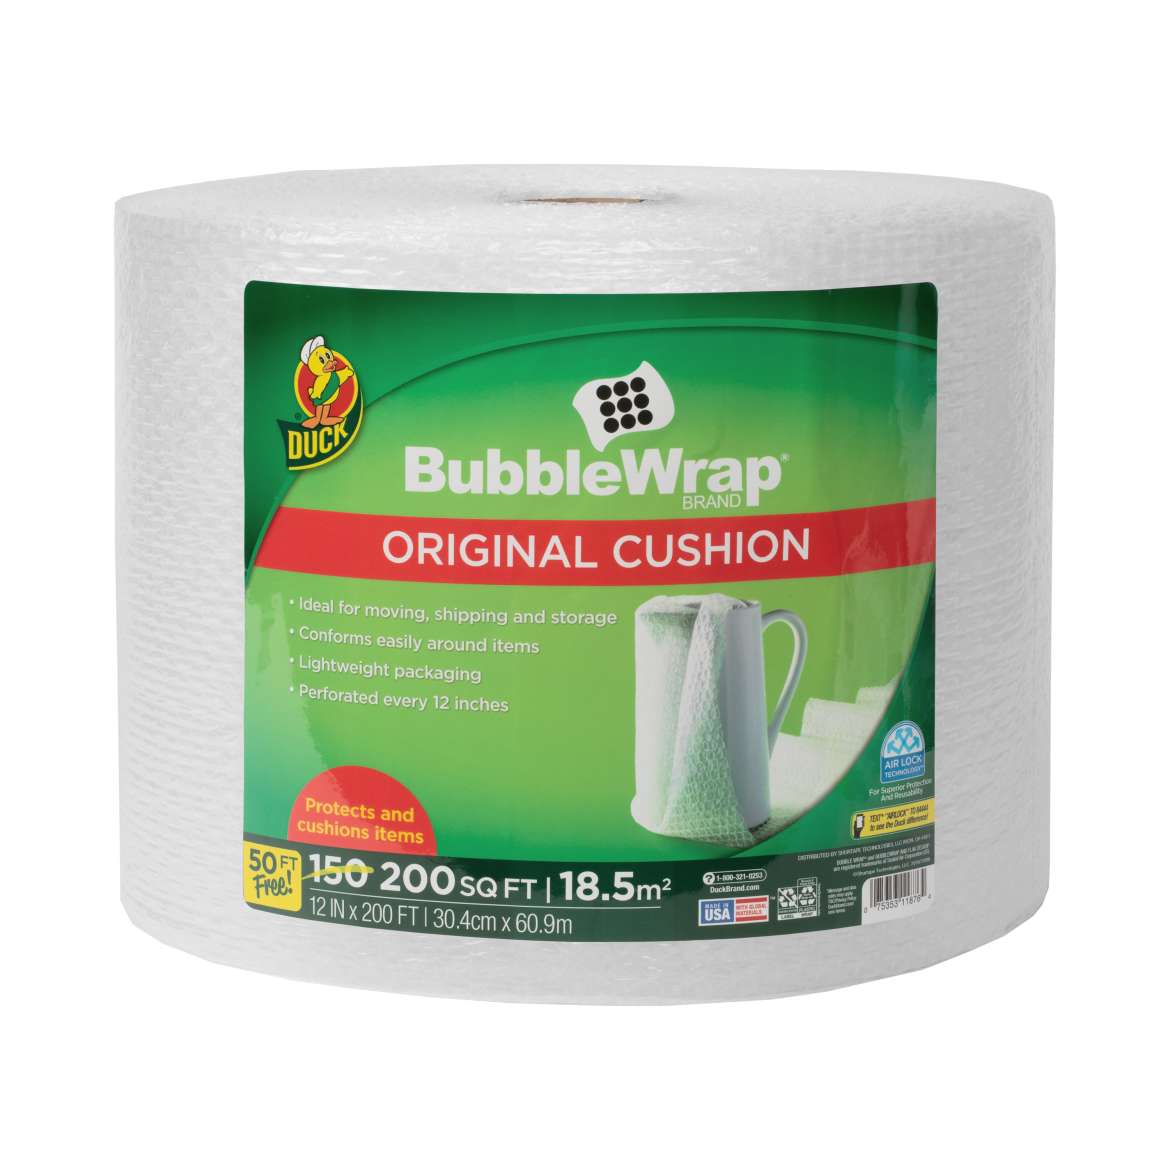 Duck® Brand Small Bubble Cushioning Wrap Image